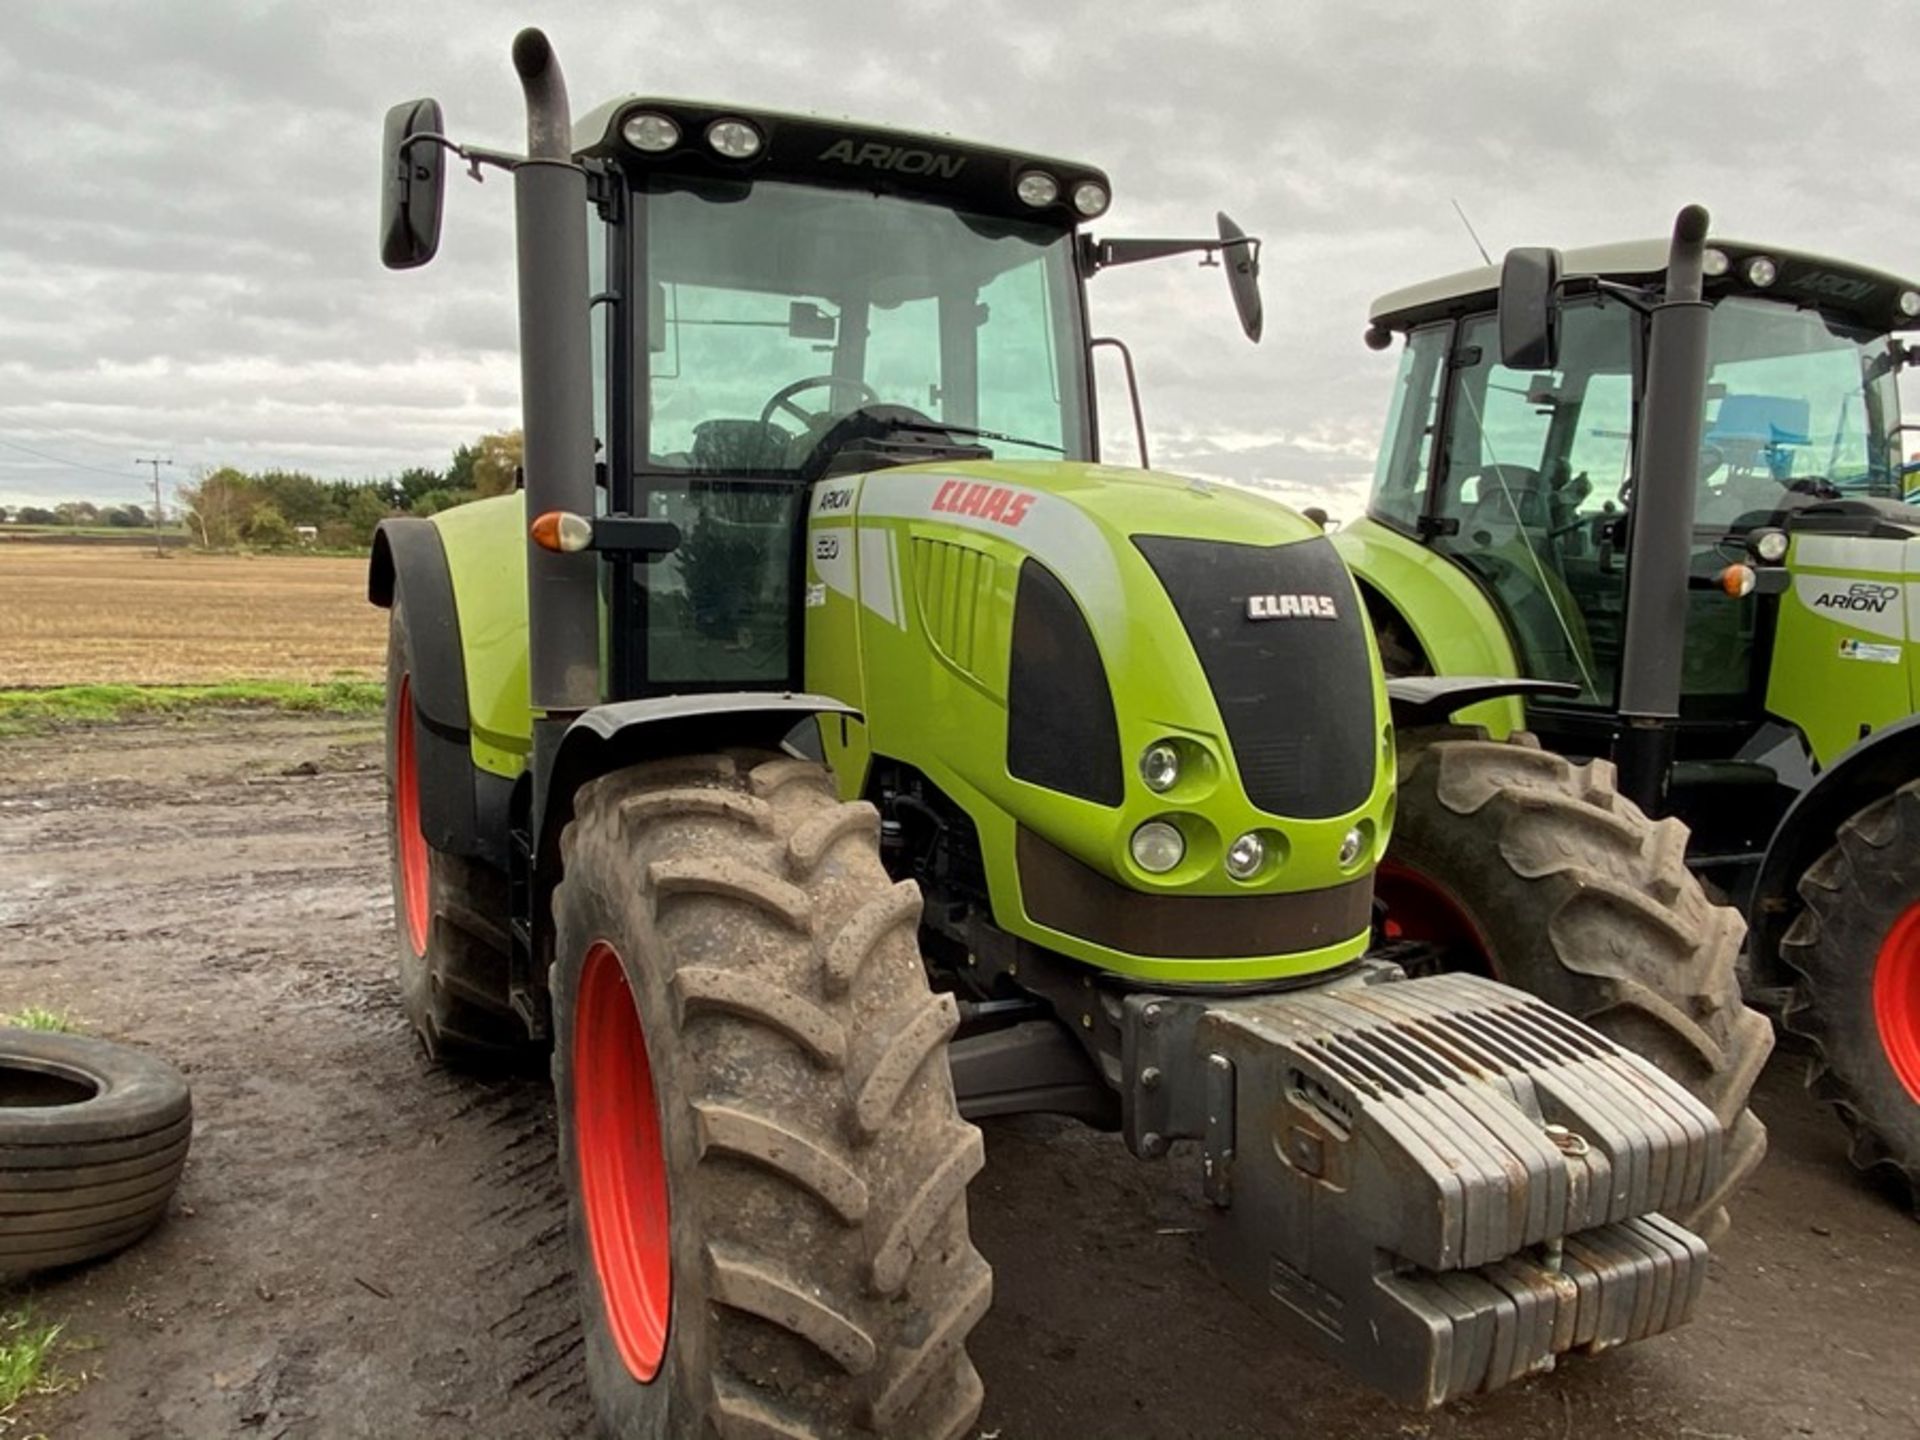 2009 Claas Arion 620 Tractor, 5571hrs, Reg Number AU09 DLN, serial number A1902356 - Image 3 of 5